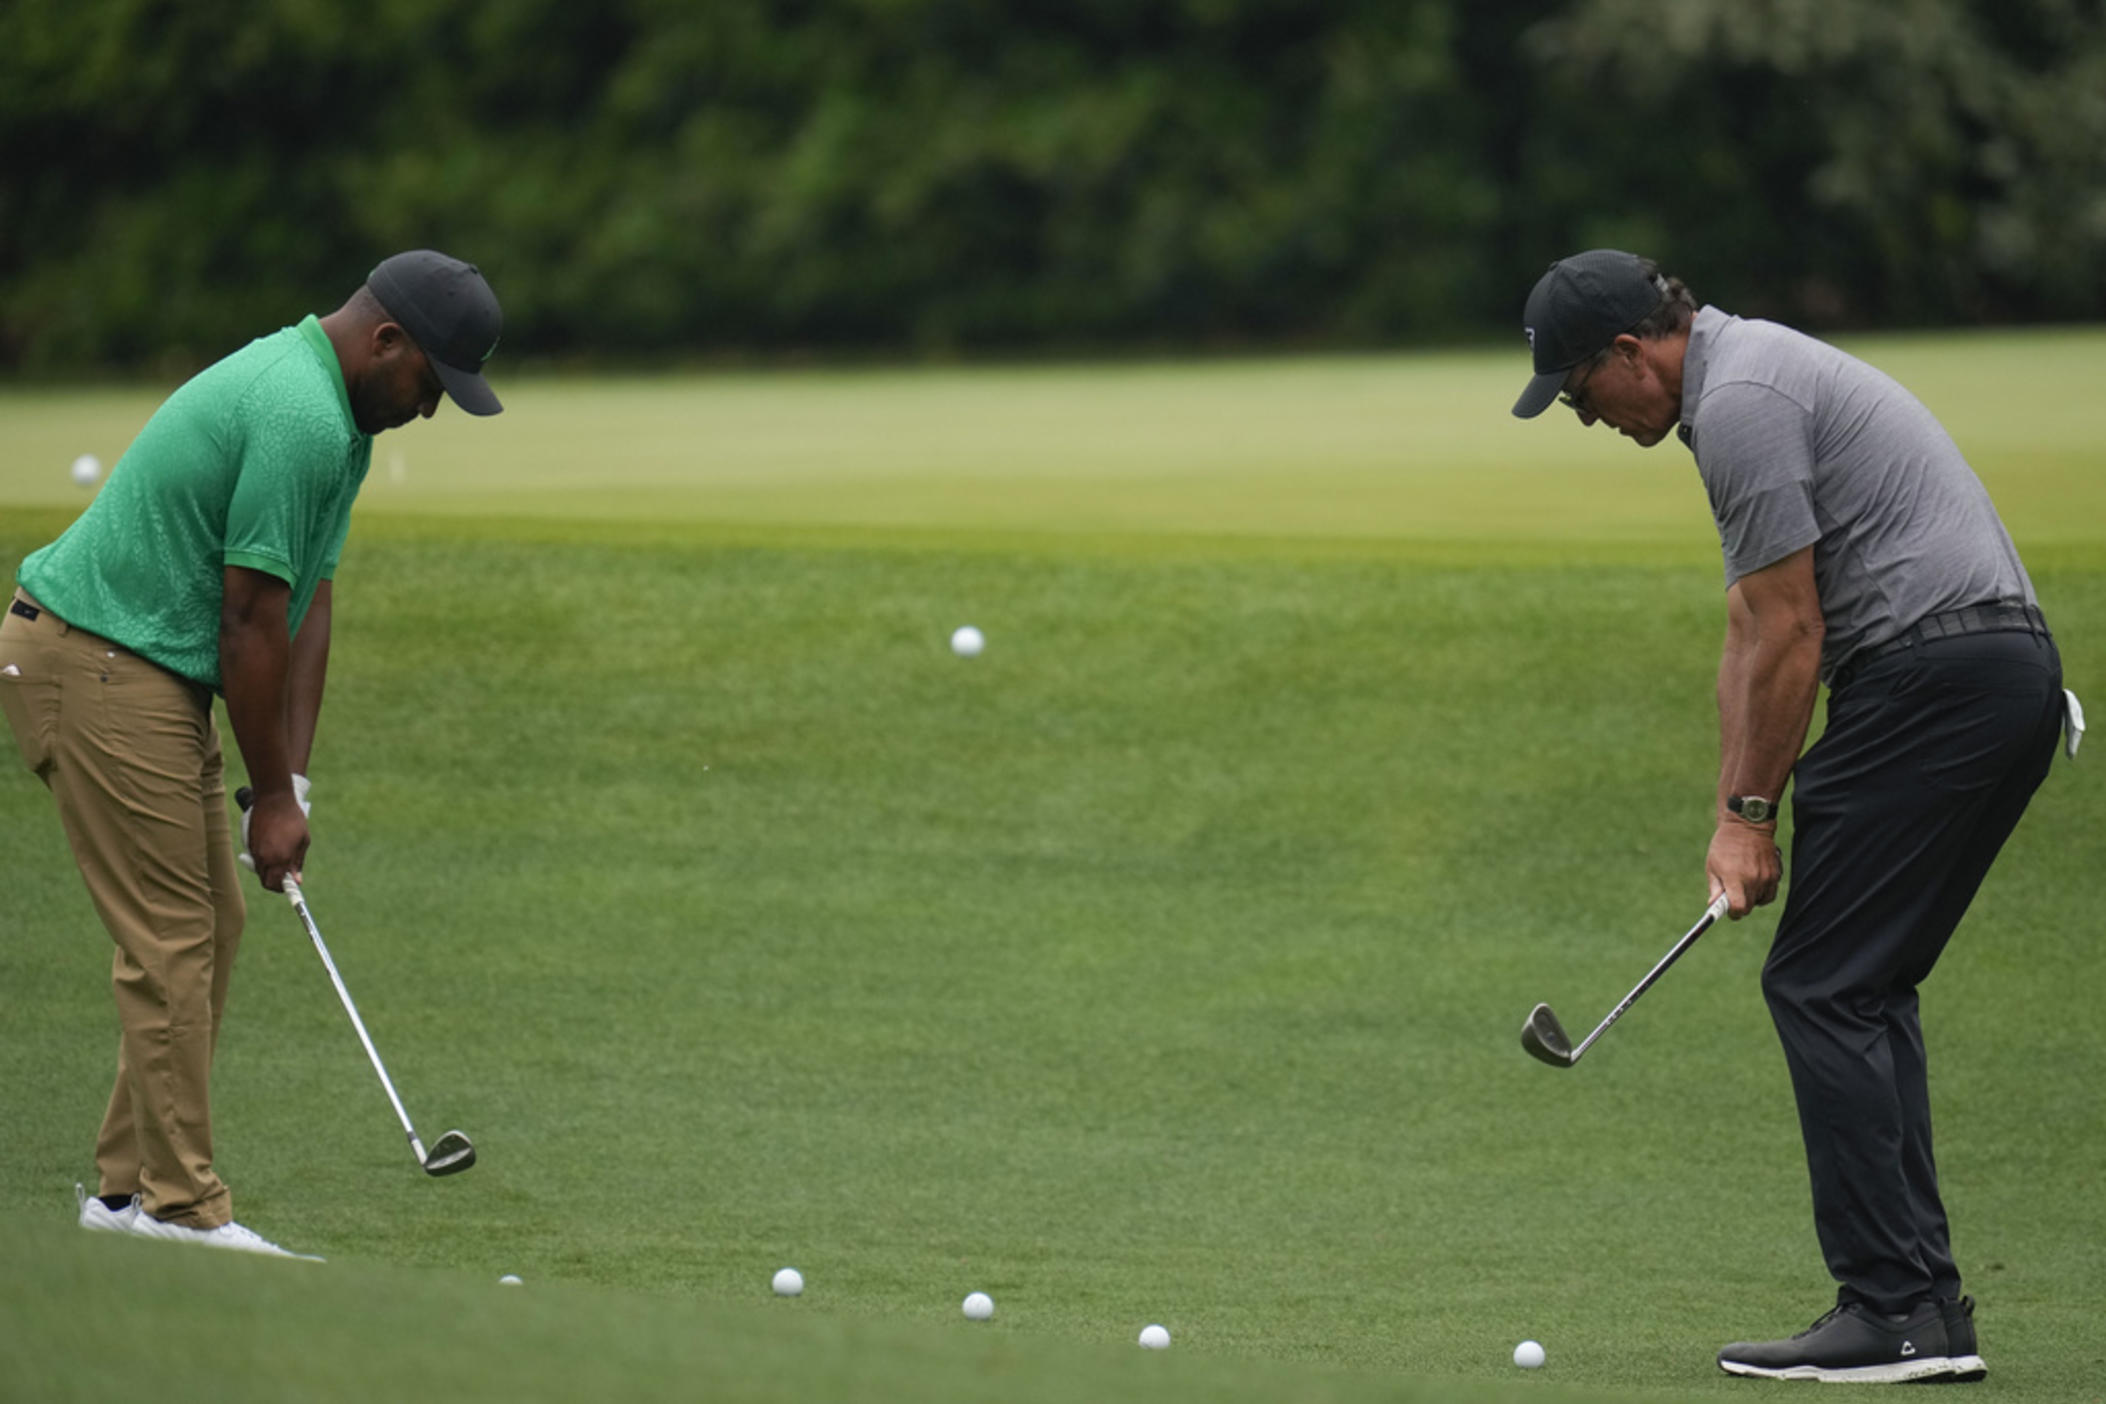 Harold Varner III, left, and Phil Mickelson chip to the 11th green during a practice for the Masters golf tournament at Augusta National Golf Club, Tuesday, April 4, 2023, in Augusta, Ga.